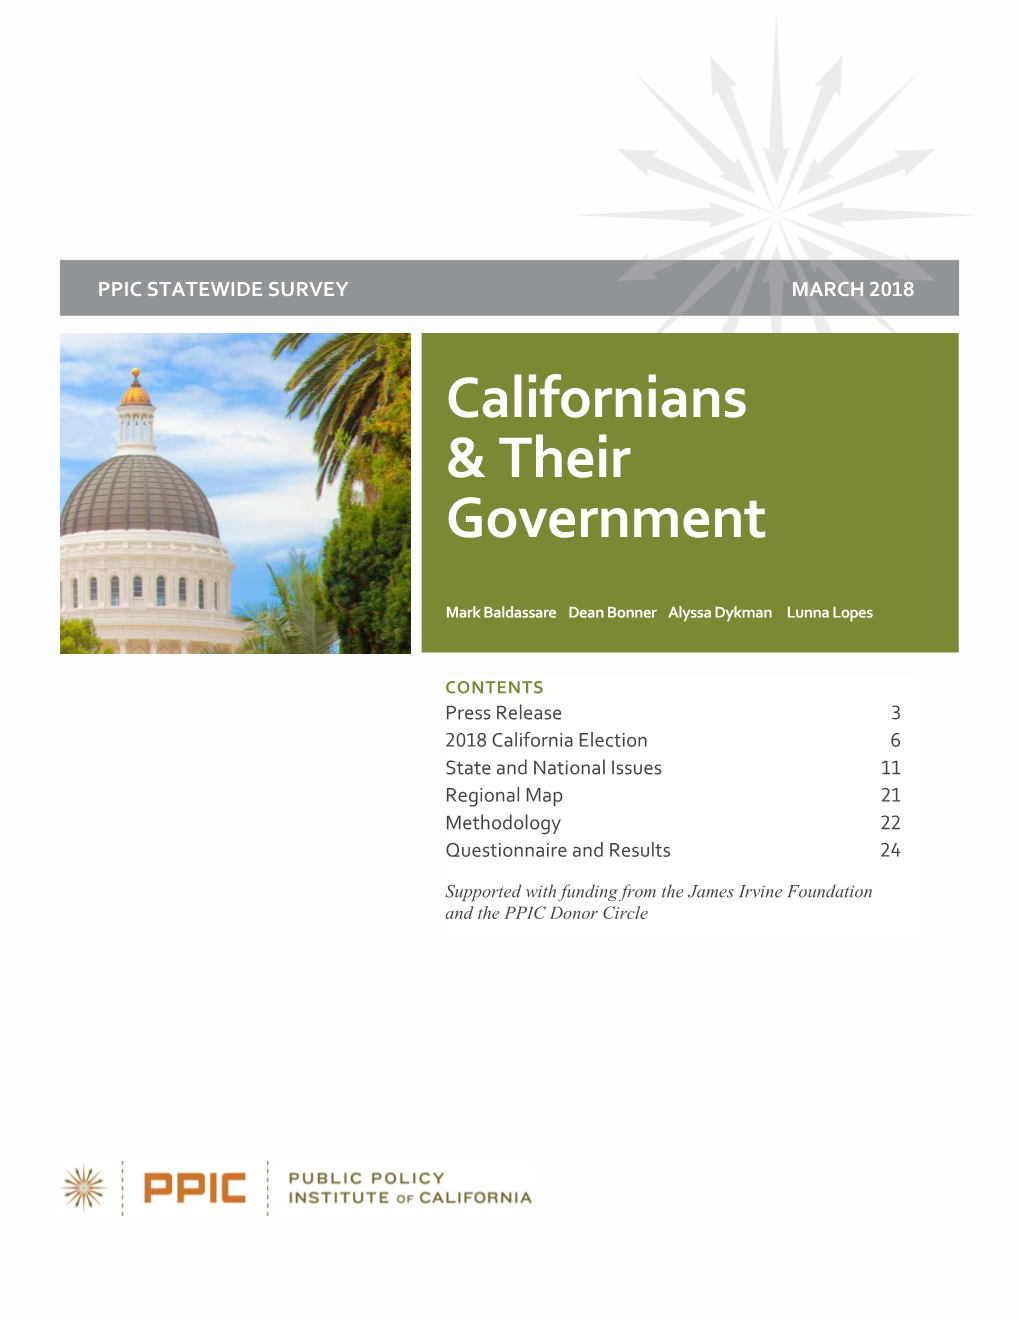 PPIC Statewide Survey: Californians and Their Government. March 2018